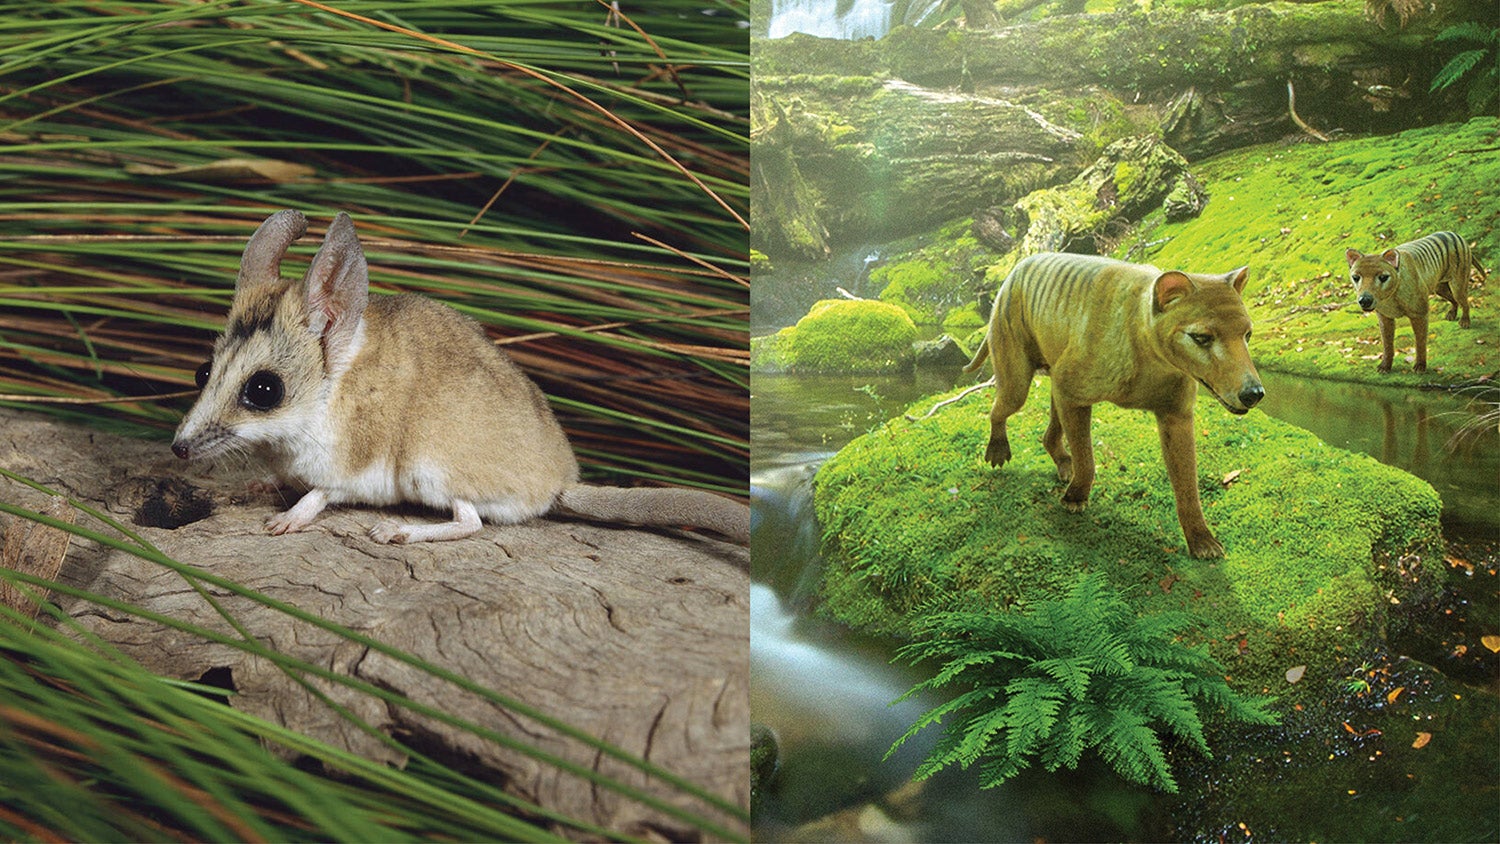 Fat-tailed dunnart sits on wooden stick in grassy area; rendering of thylacine in swampy, rocky area